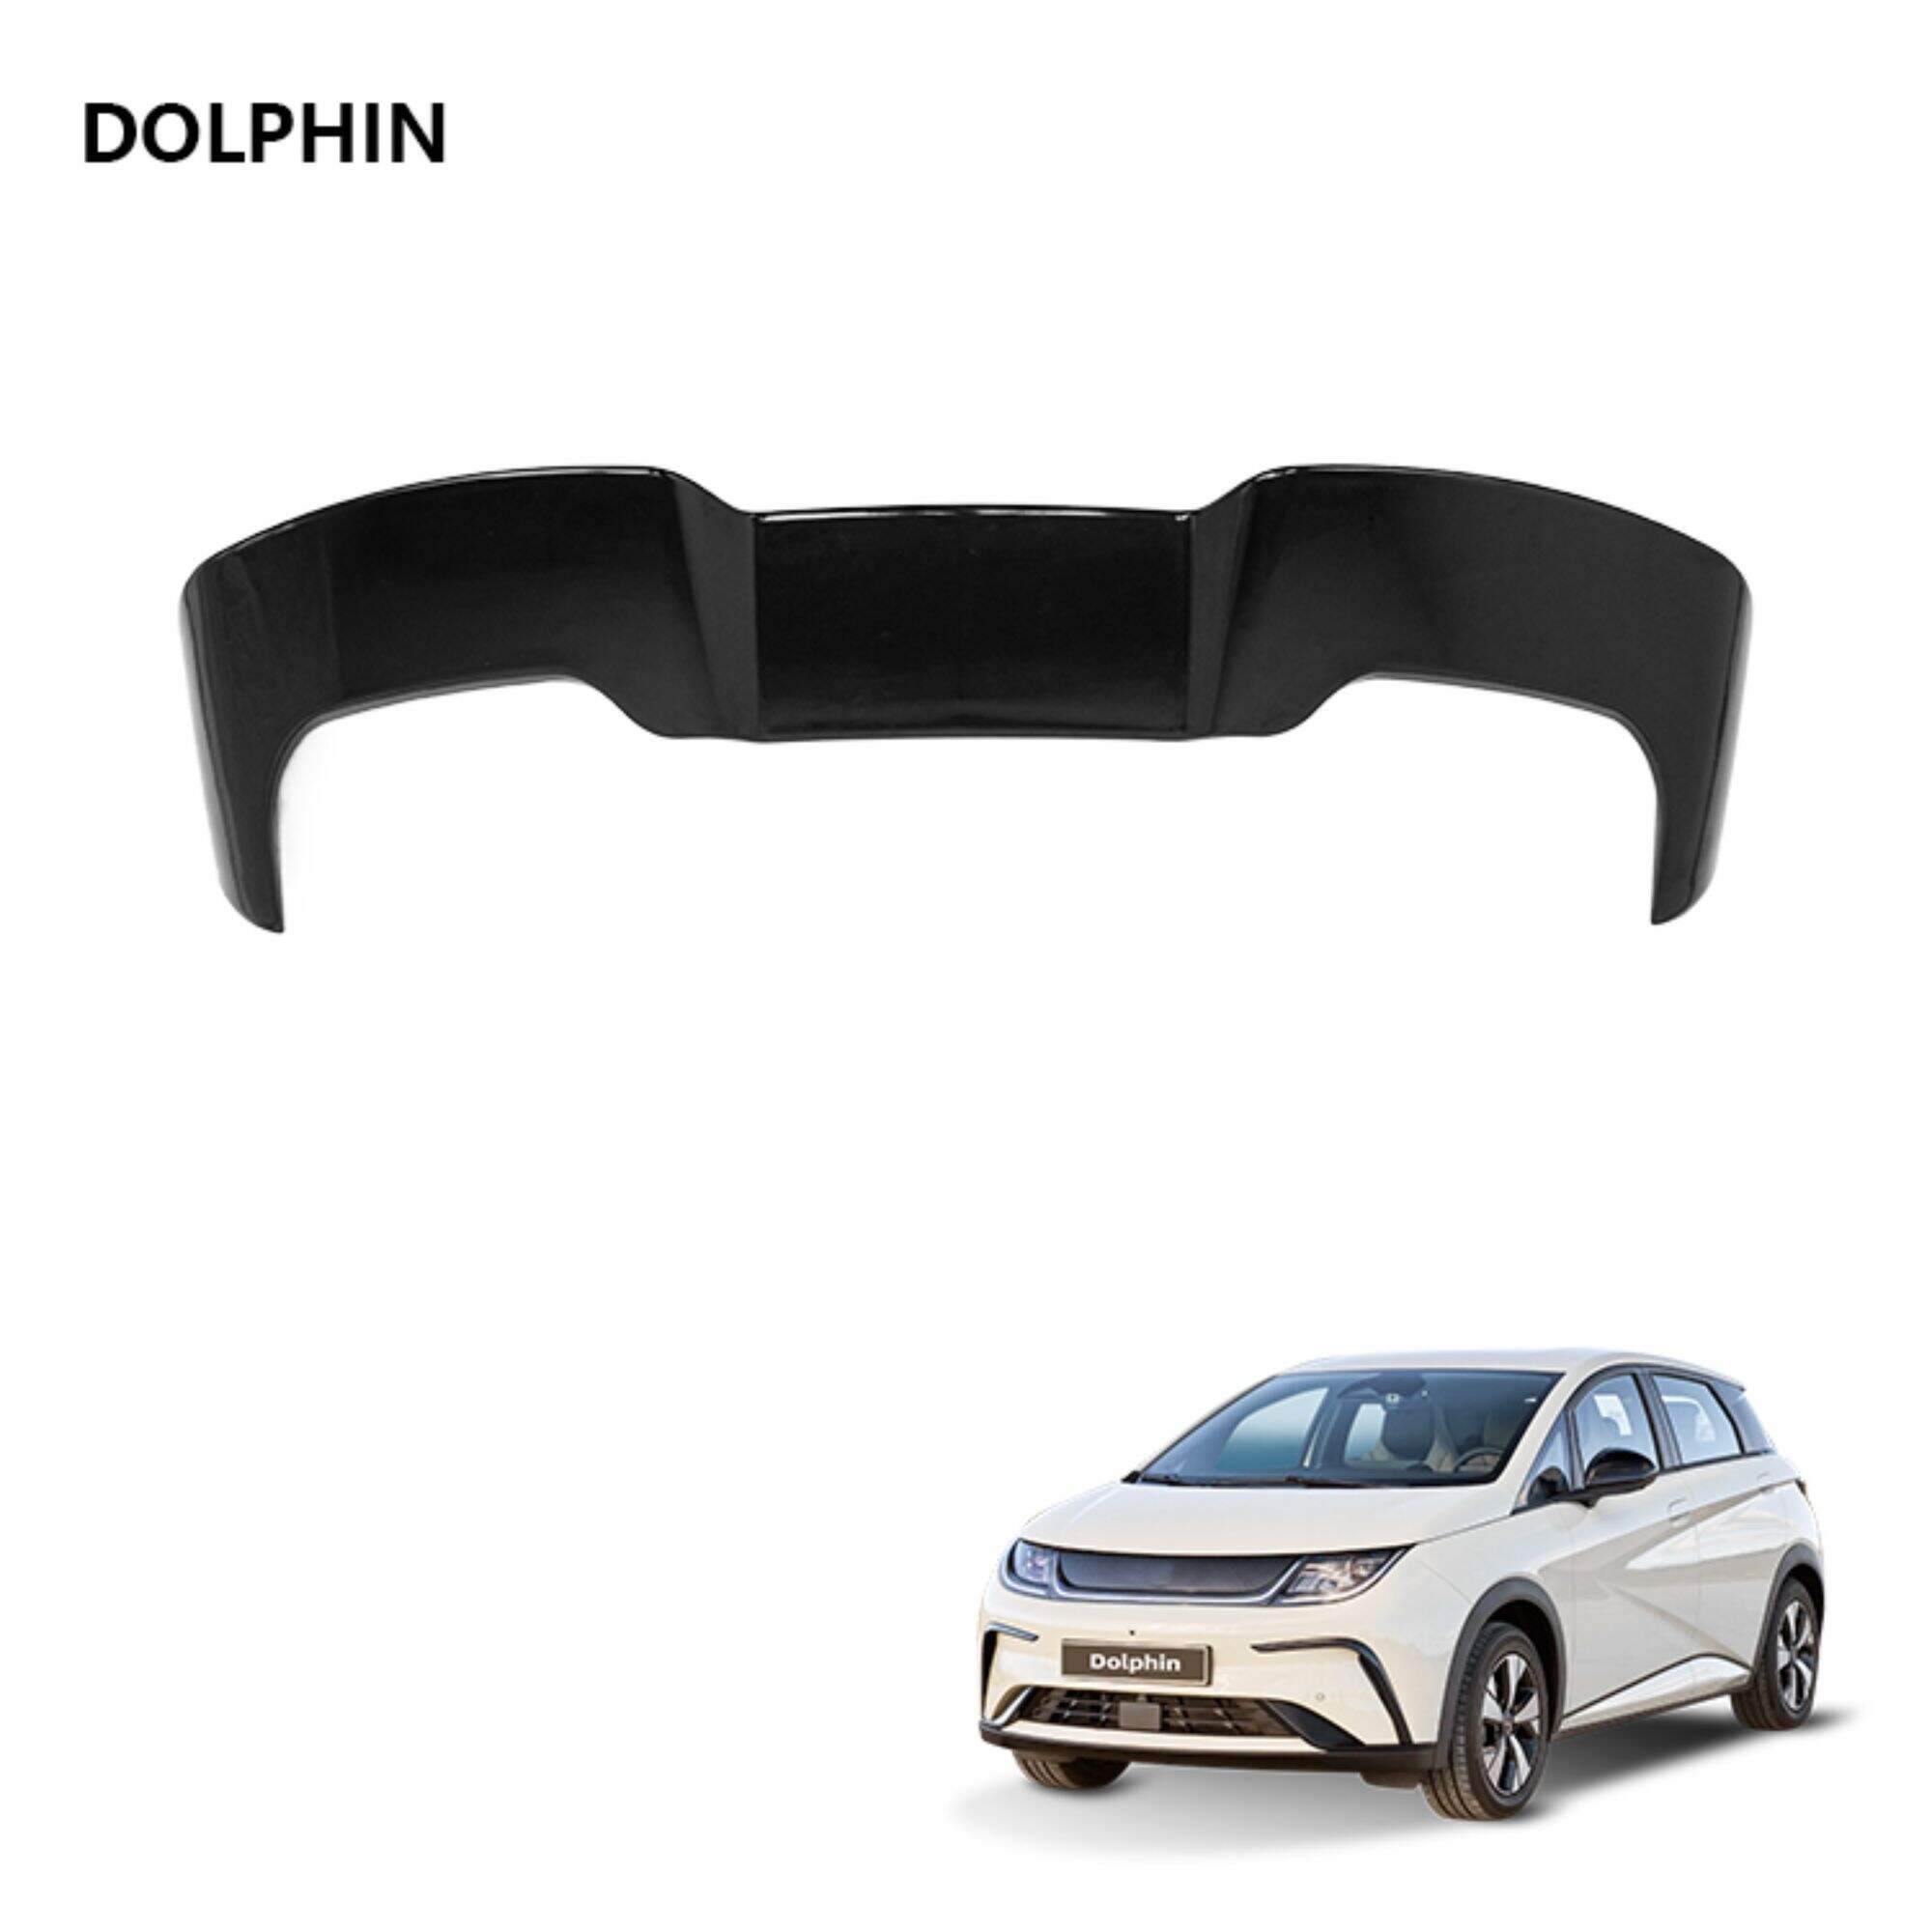 Dolphin Electric Car Exterior Accessories Carbon Fiber Pattern Workblank Trunk Spoiler Universal Car Rear Roof Wing Spoiler For BYD Dolphin